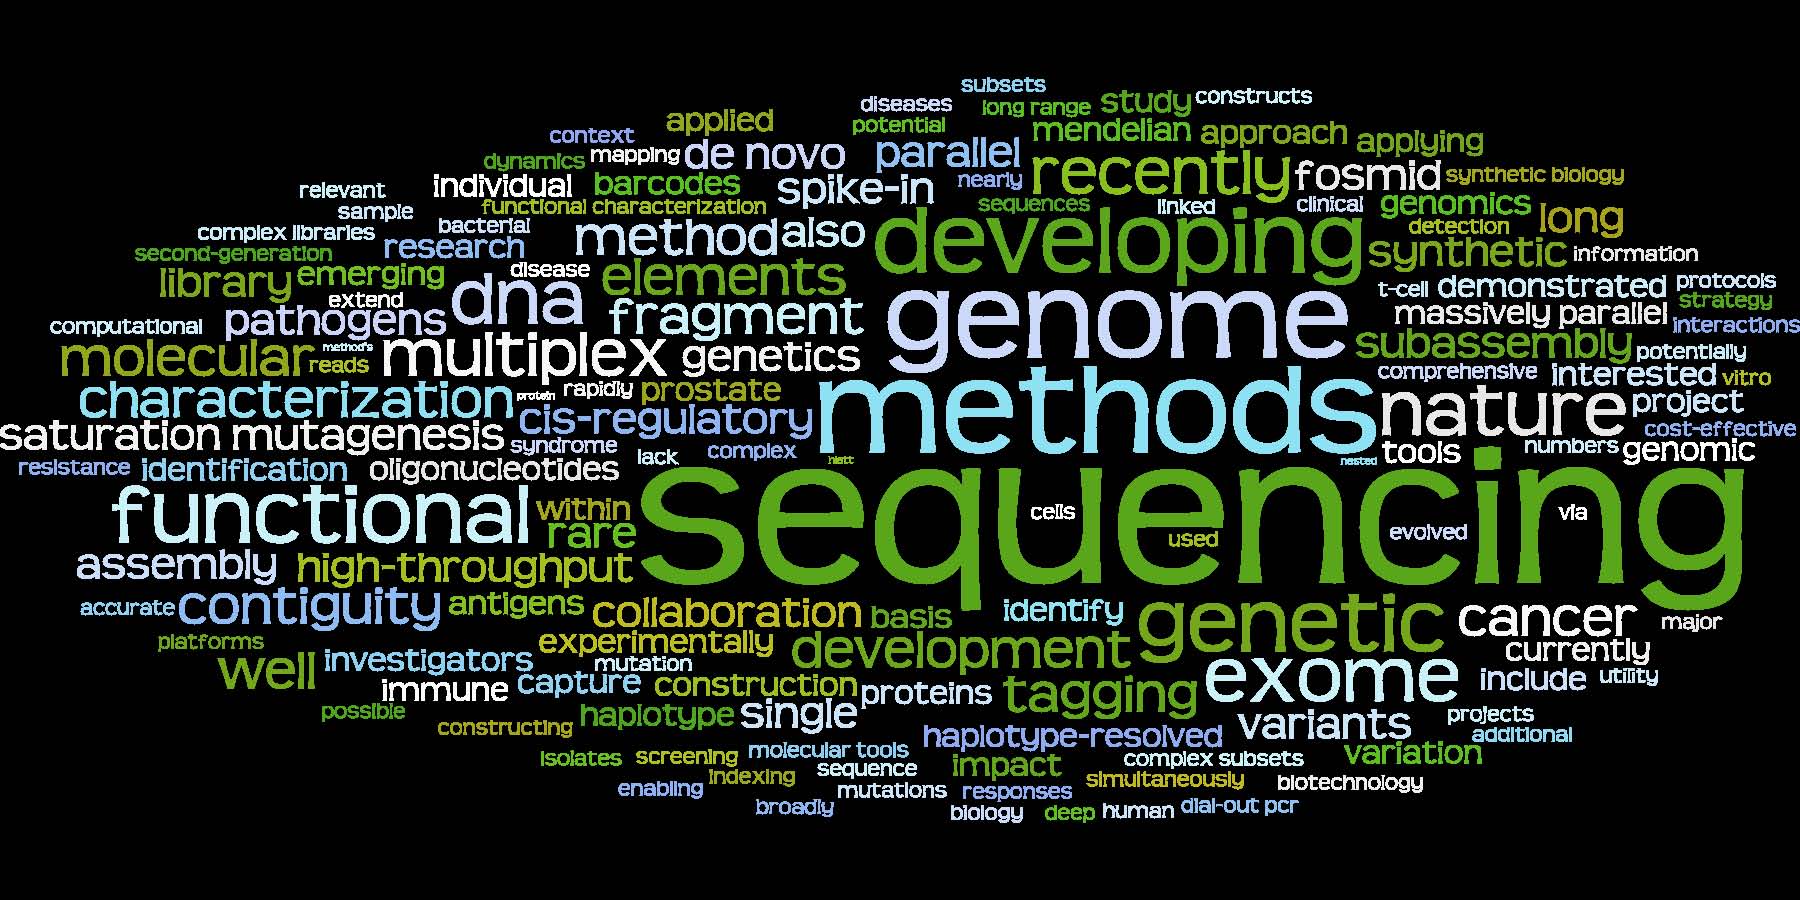 Wordle based on abstract content (September 2011)